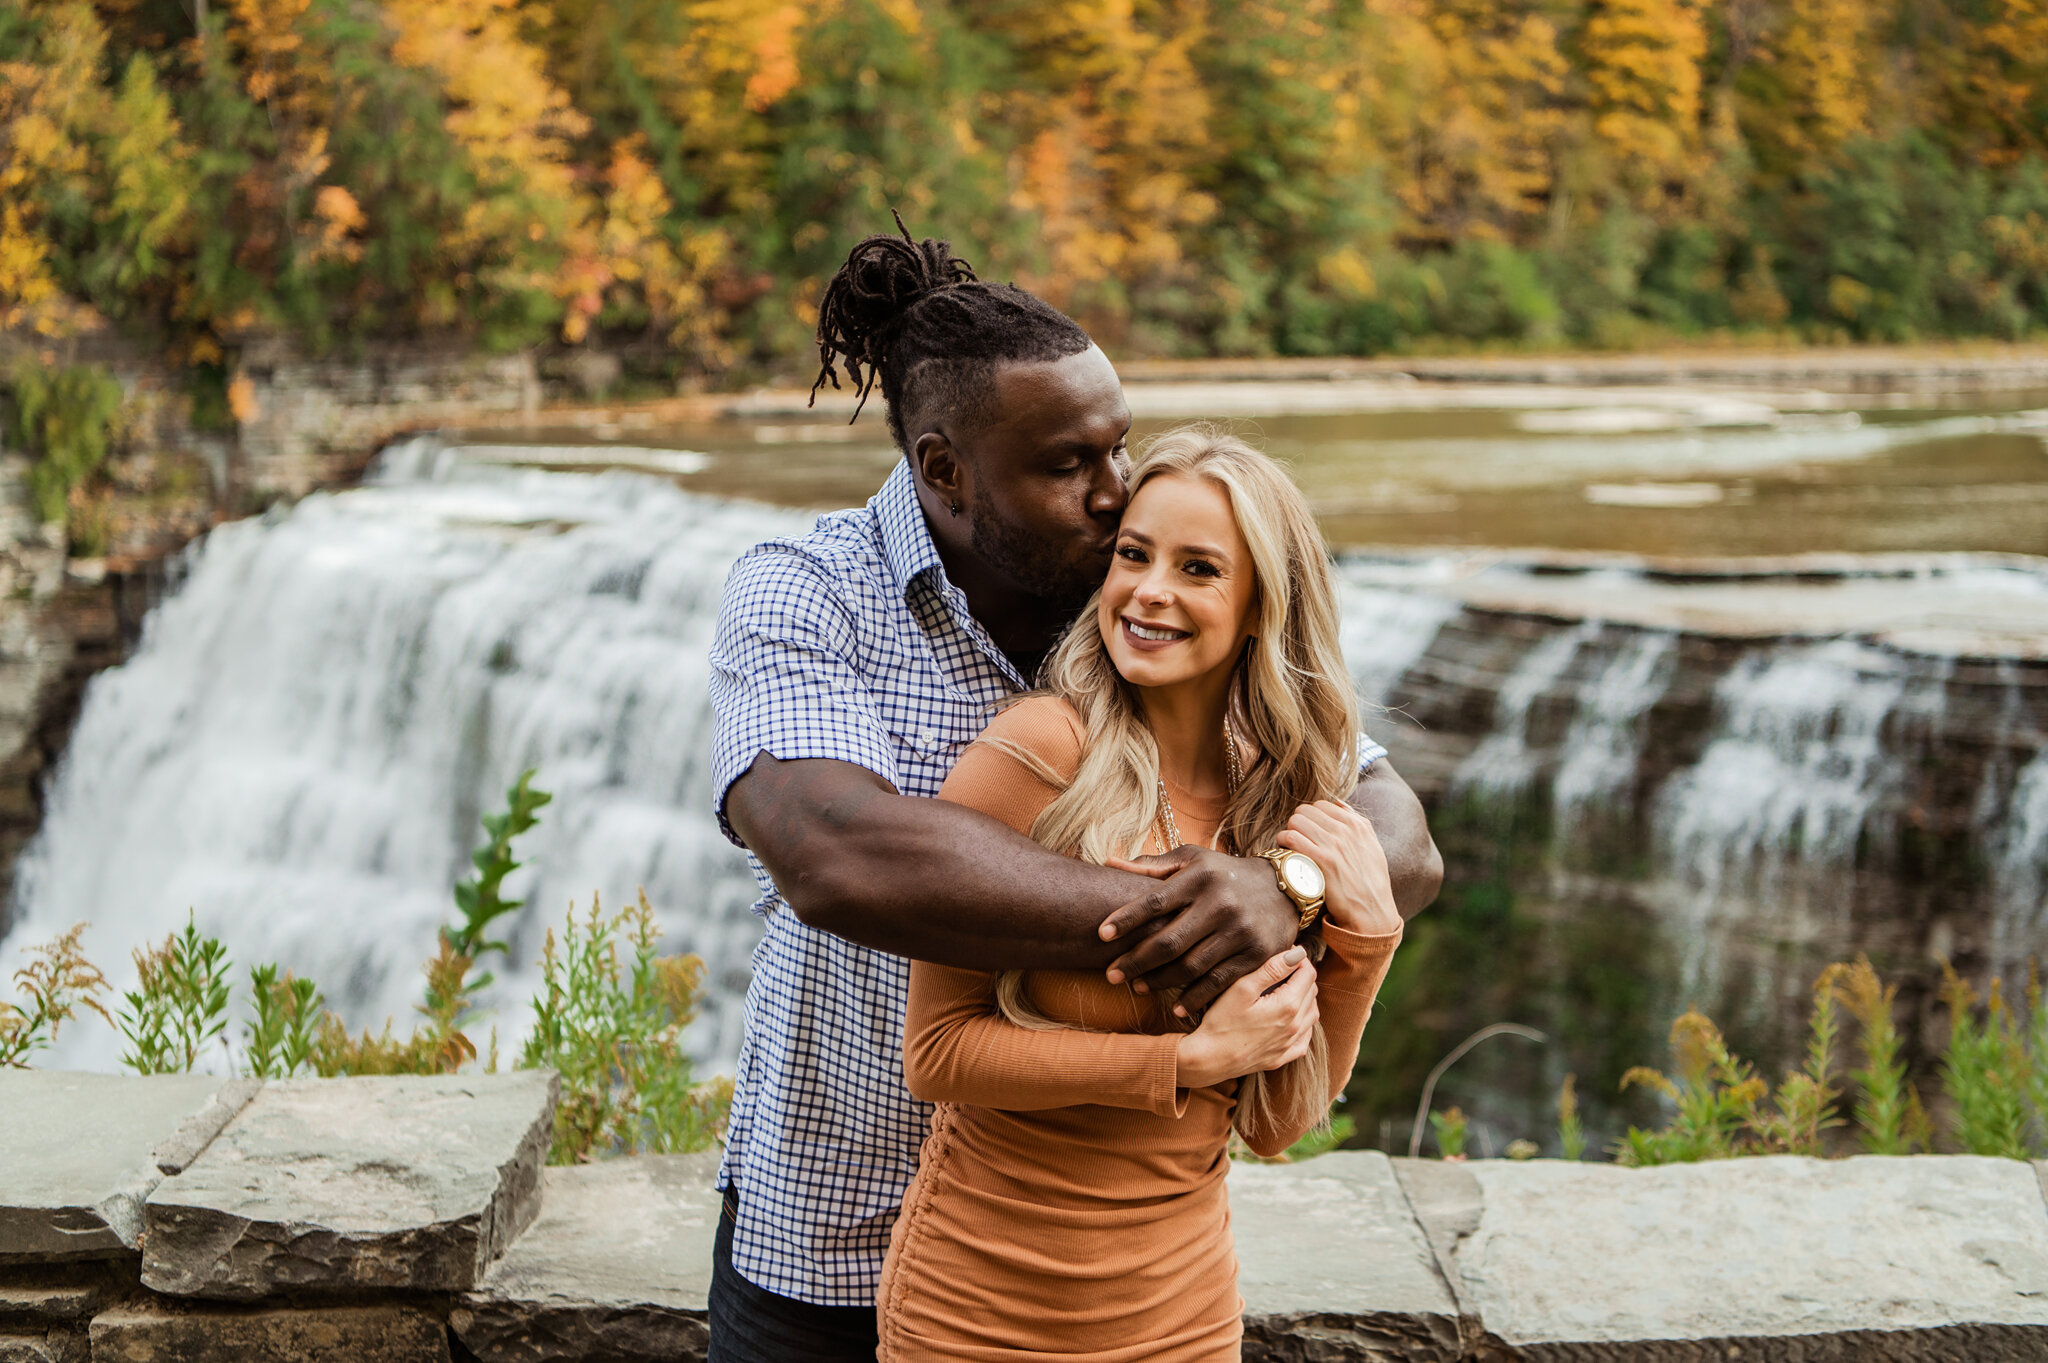 Letchworth_State_Park_Rochester_Couples_Session_JILL_STUDIO_Rochester_NY_Photographer_9153.jpg